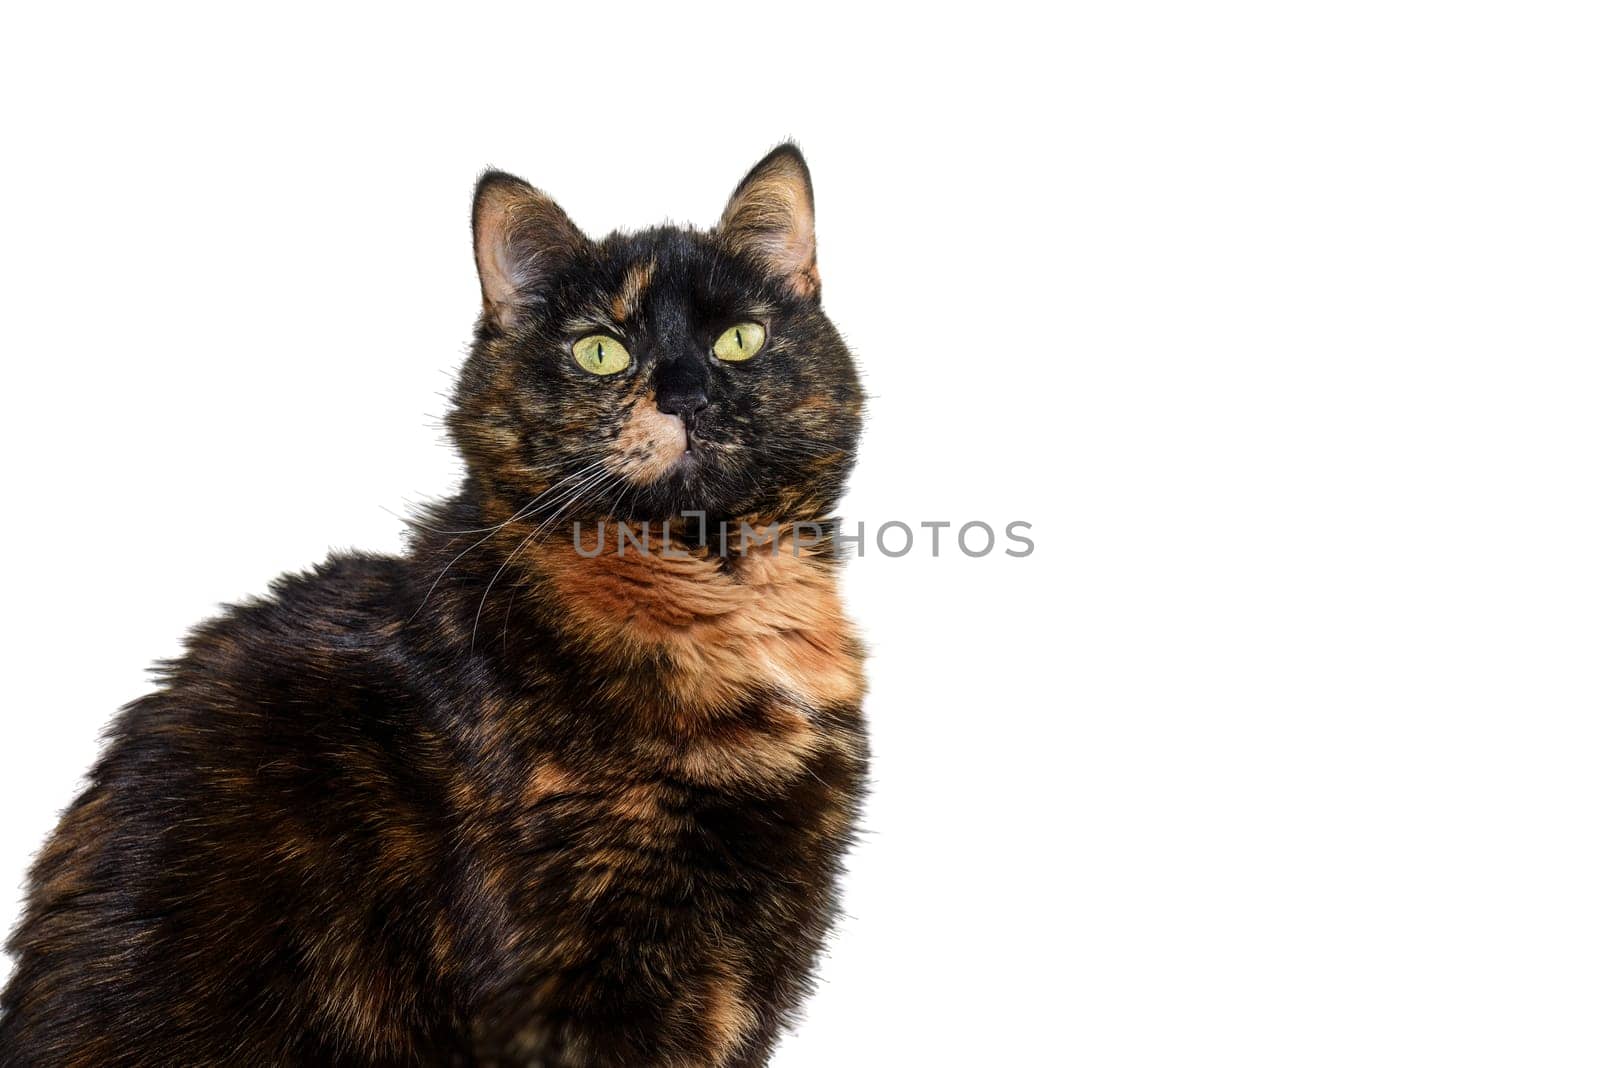 Portrait of a tricolor cat with green eyes on an isolated white background. Cute tortoiseshell cat. The tortoiseshell cat is sitting and looking at the camera. by Nickstock